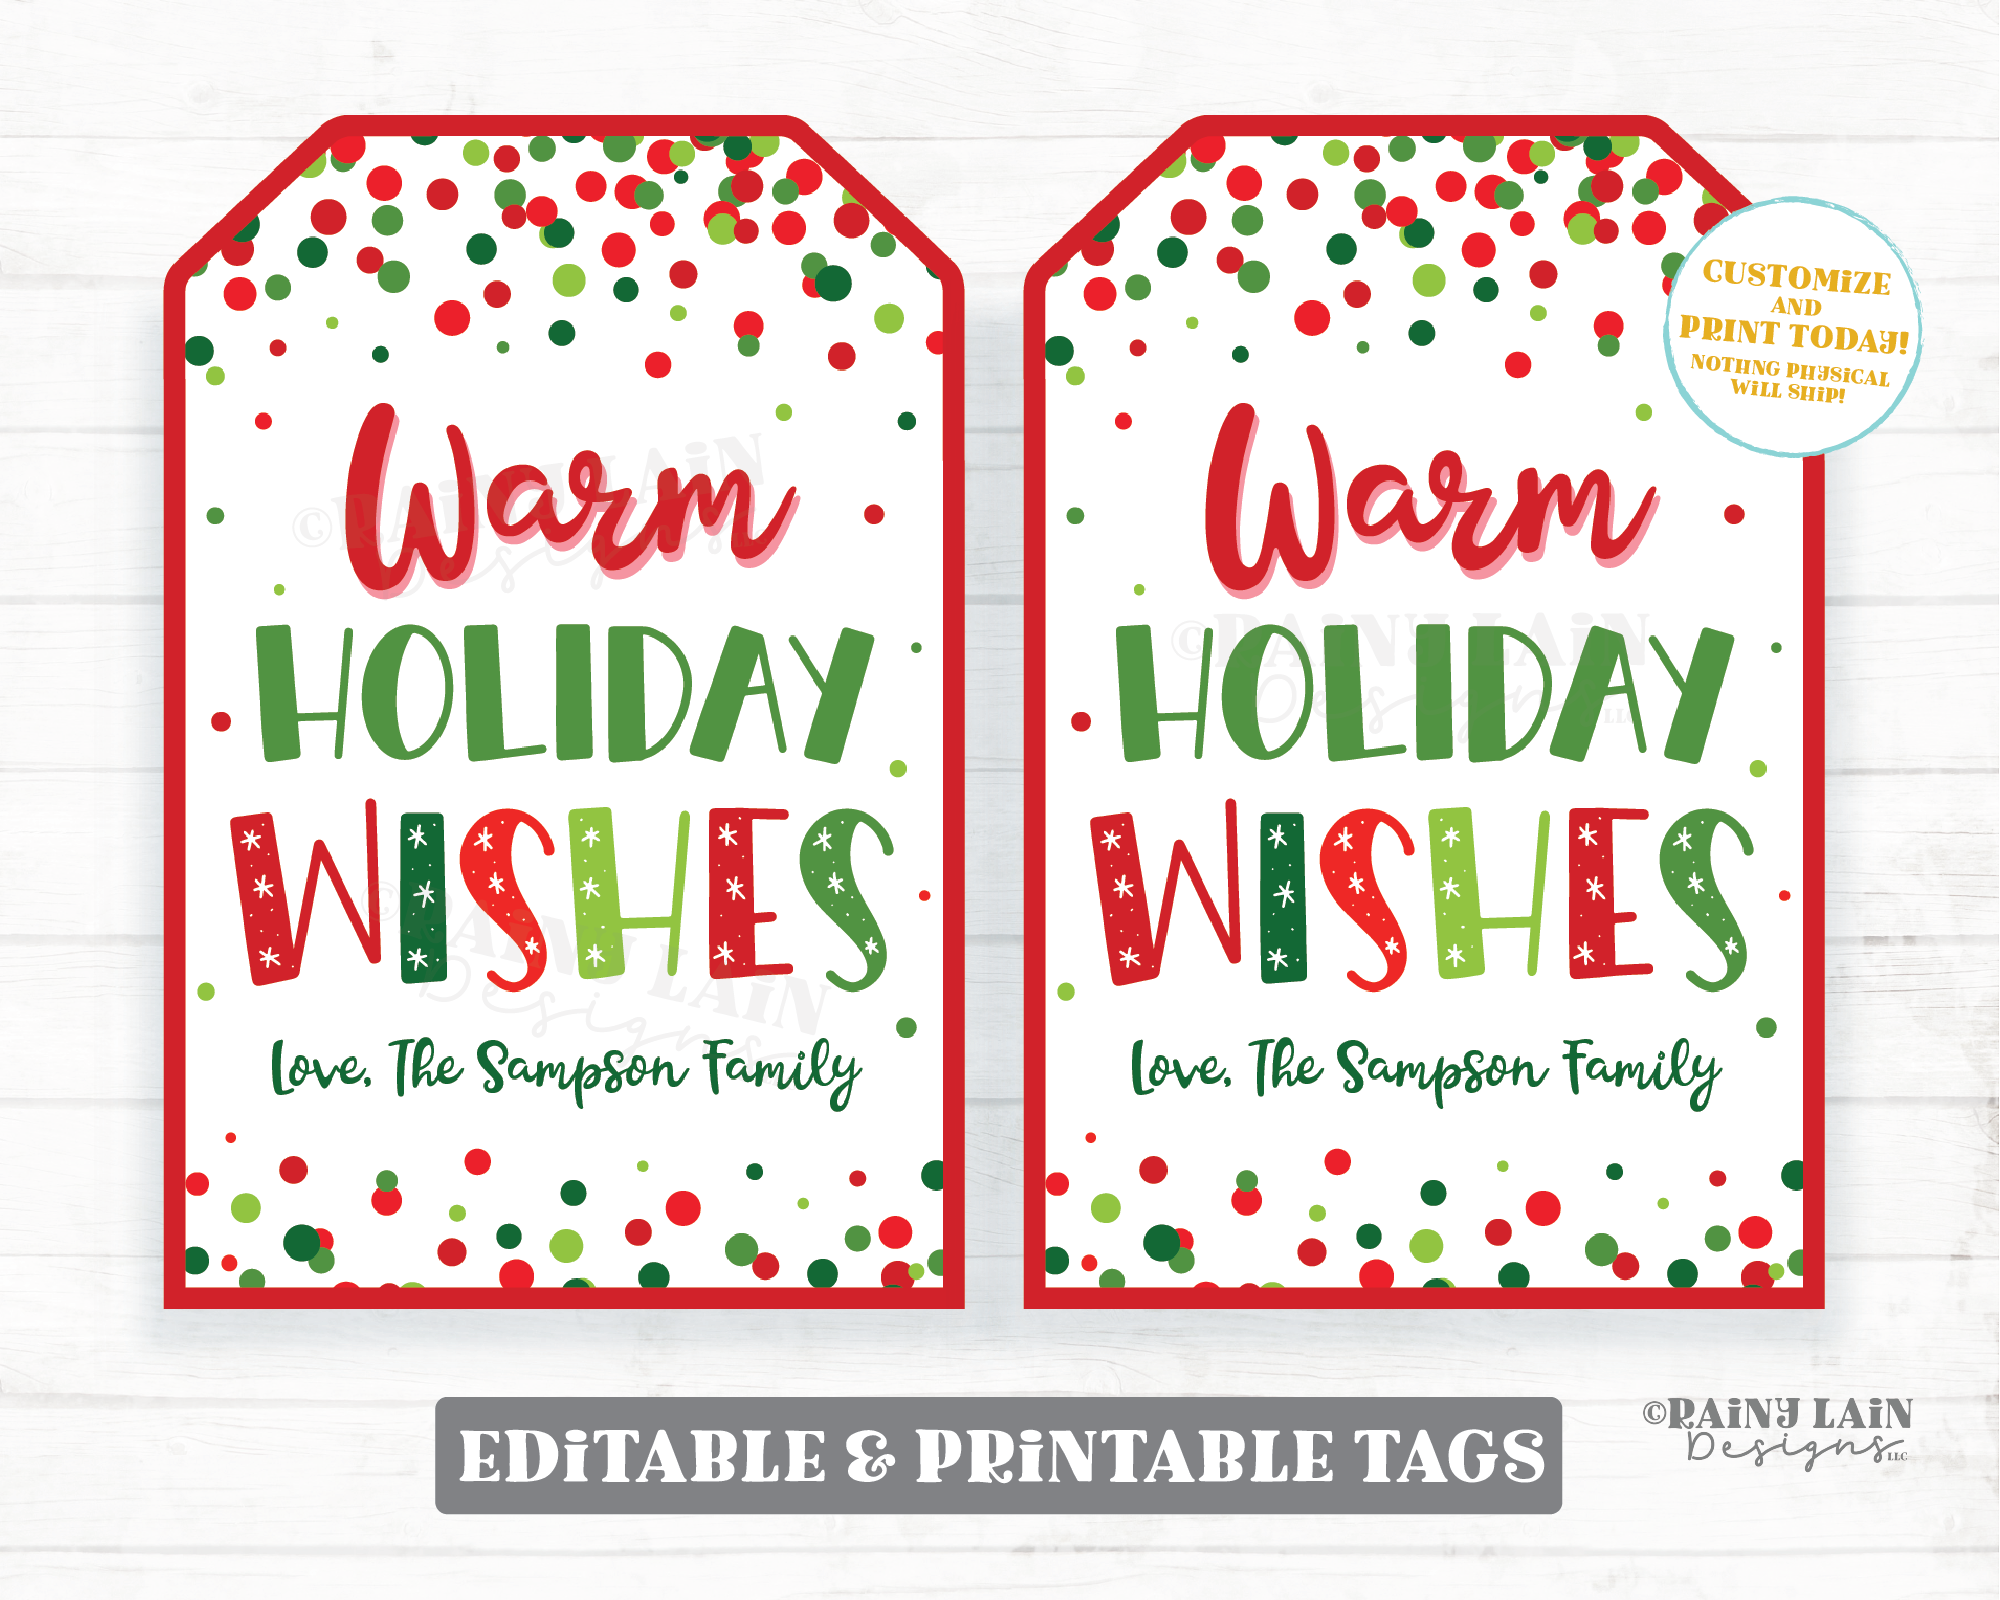 Warm Holiday Wishes Tag Christmas Treat Thank you Tag Holiday Appreciation Gift Christmas Favor Employee Company Staff Teacher Cozy Warmer